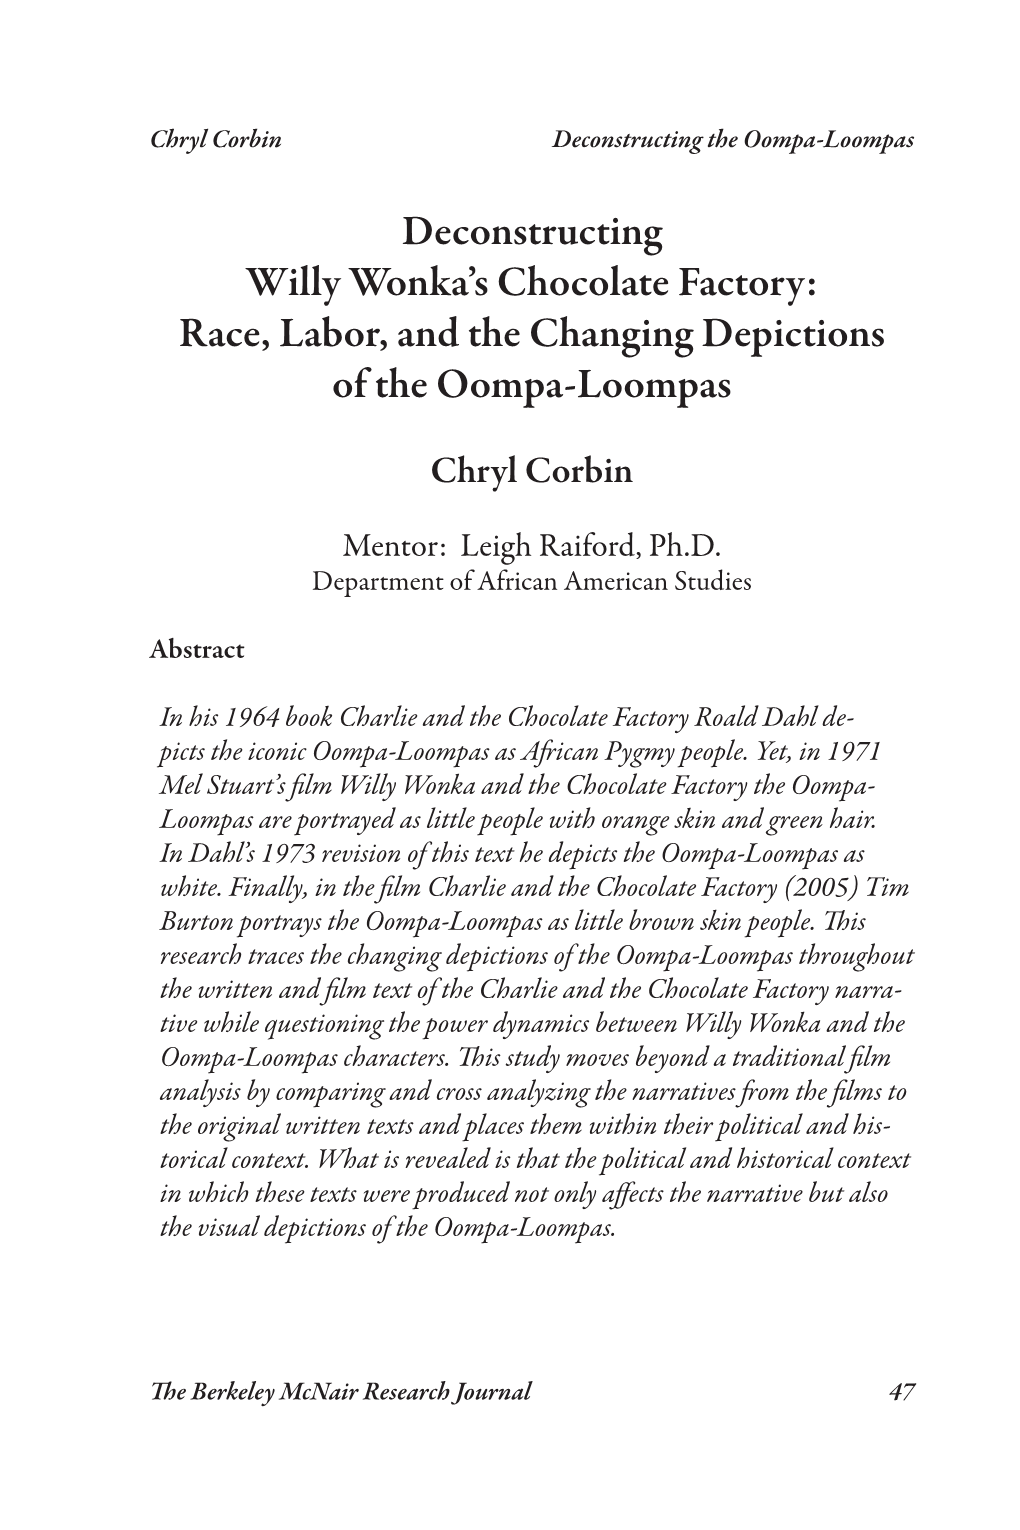 Deconstructing Willy Wonka's Chocolate Factory: Race, Labor